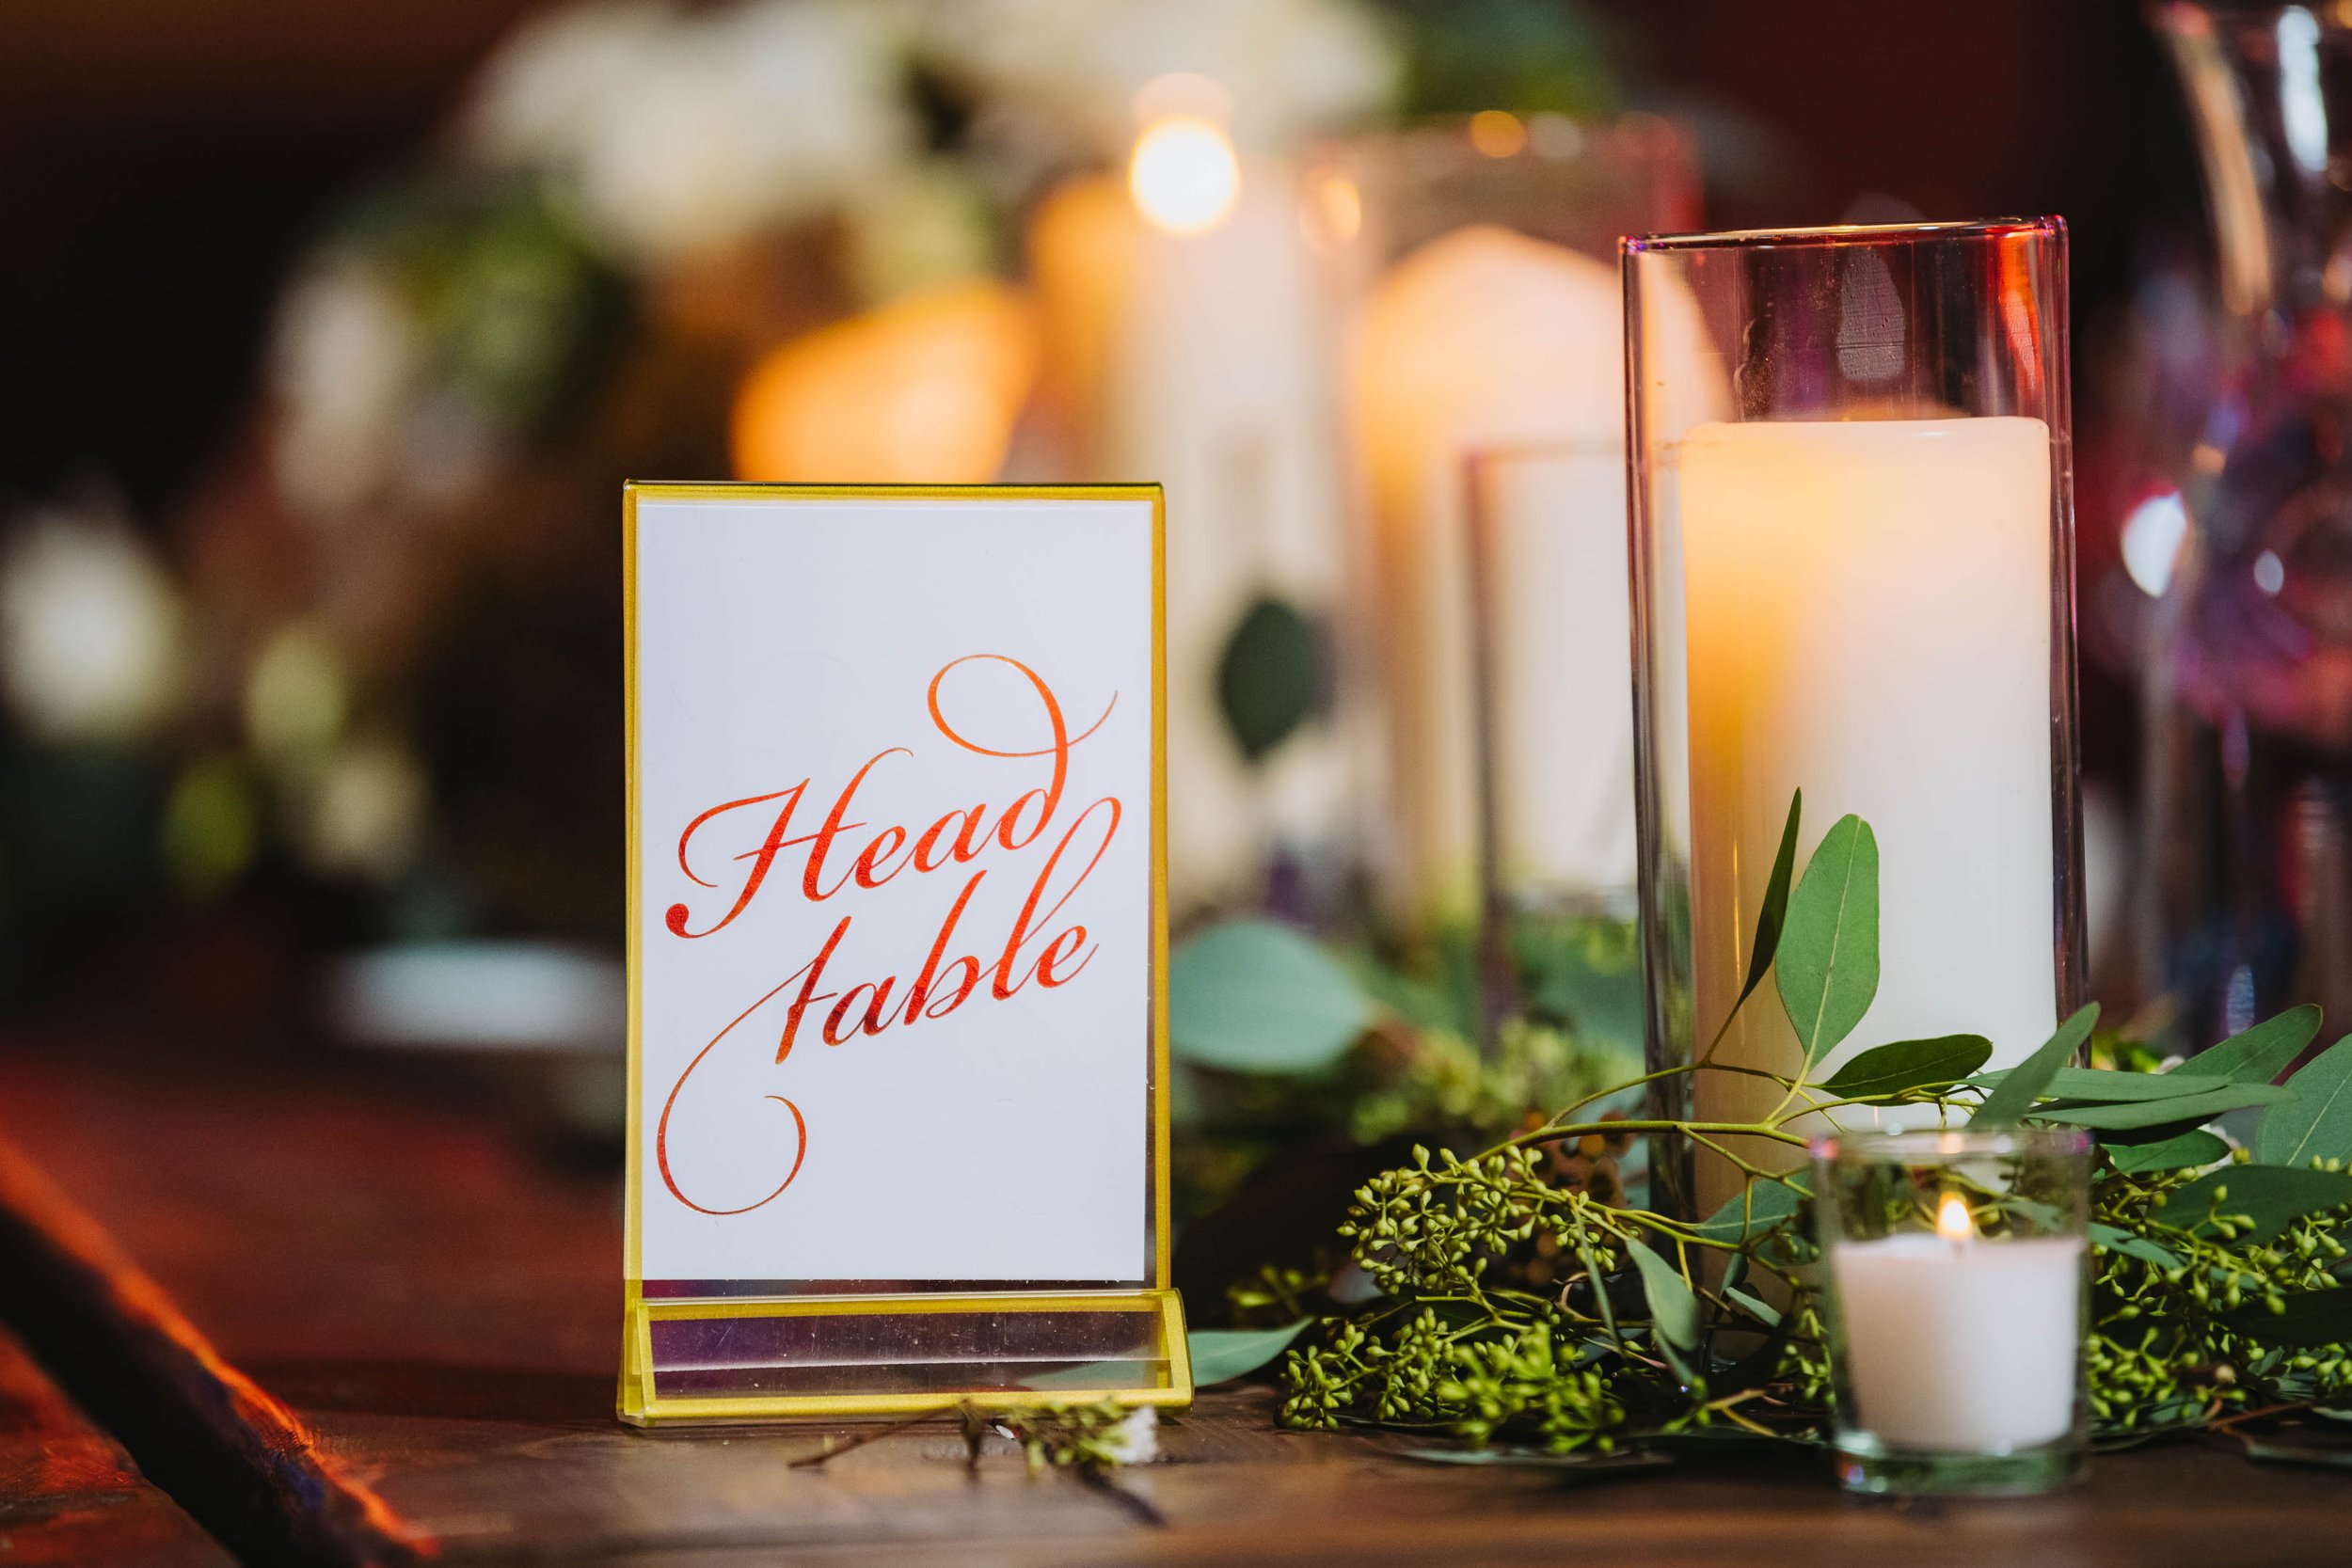 Wedding Day Photos | Ravenswood Event Center | J. Brown Photography | detail photo of head table